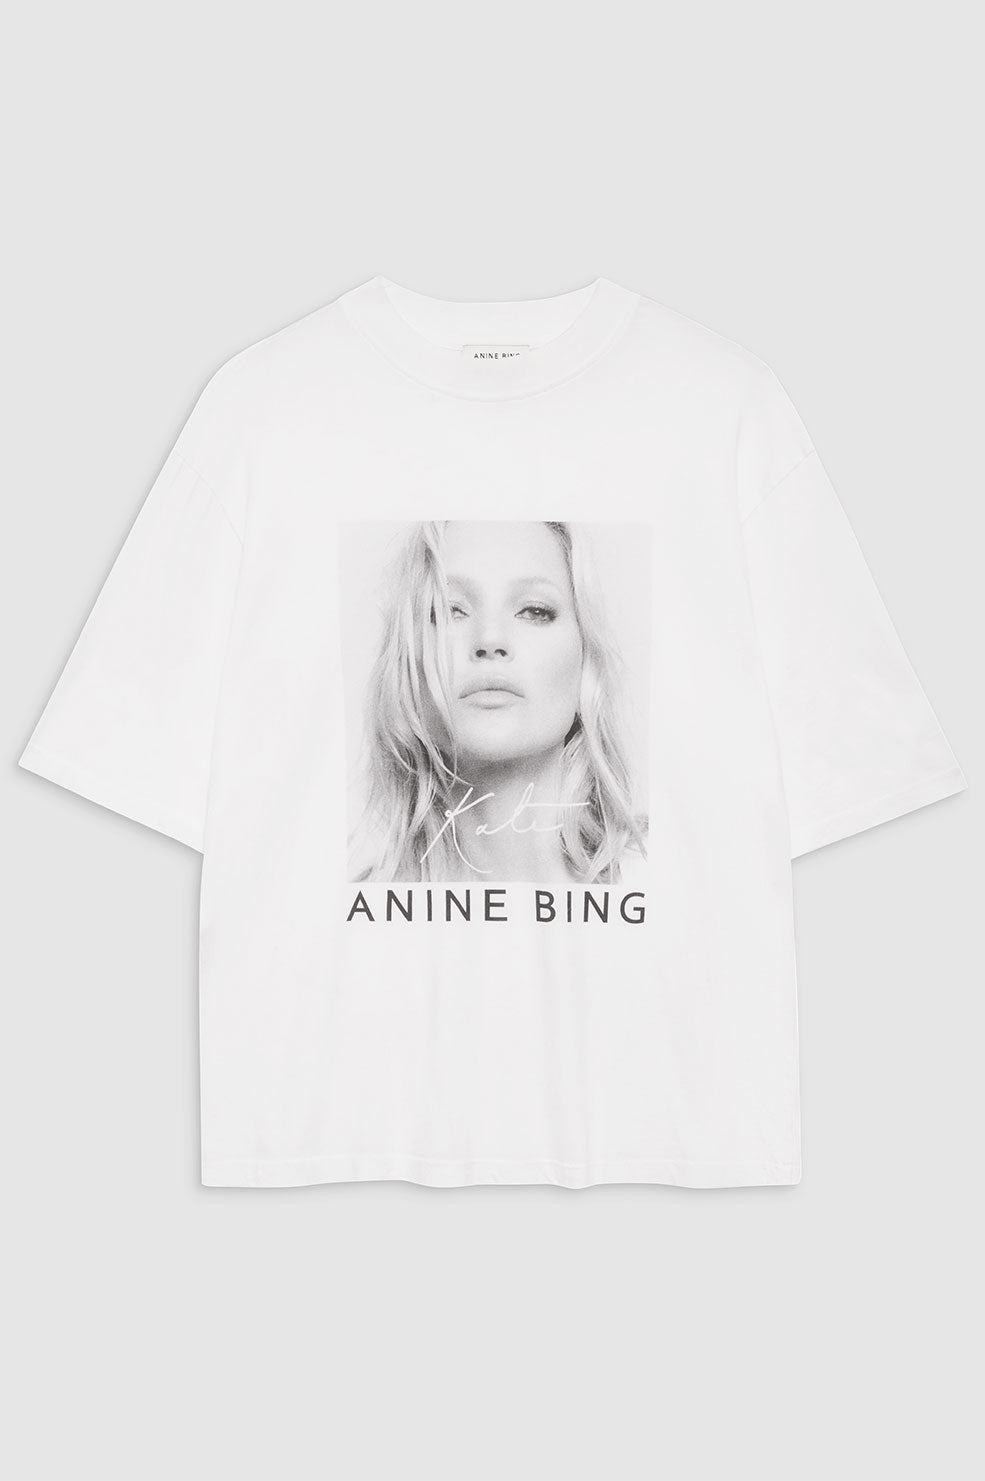 ANINE BING OFFICIAL on Instagram: Photographs of Kate Moss have